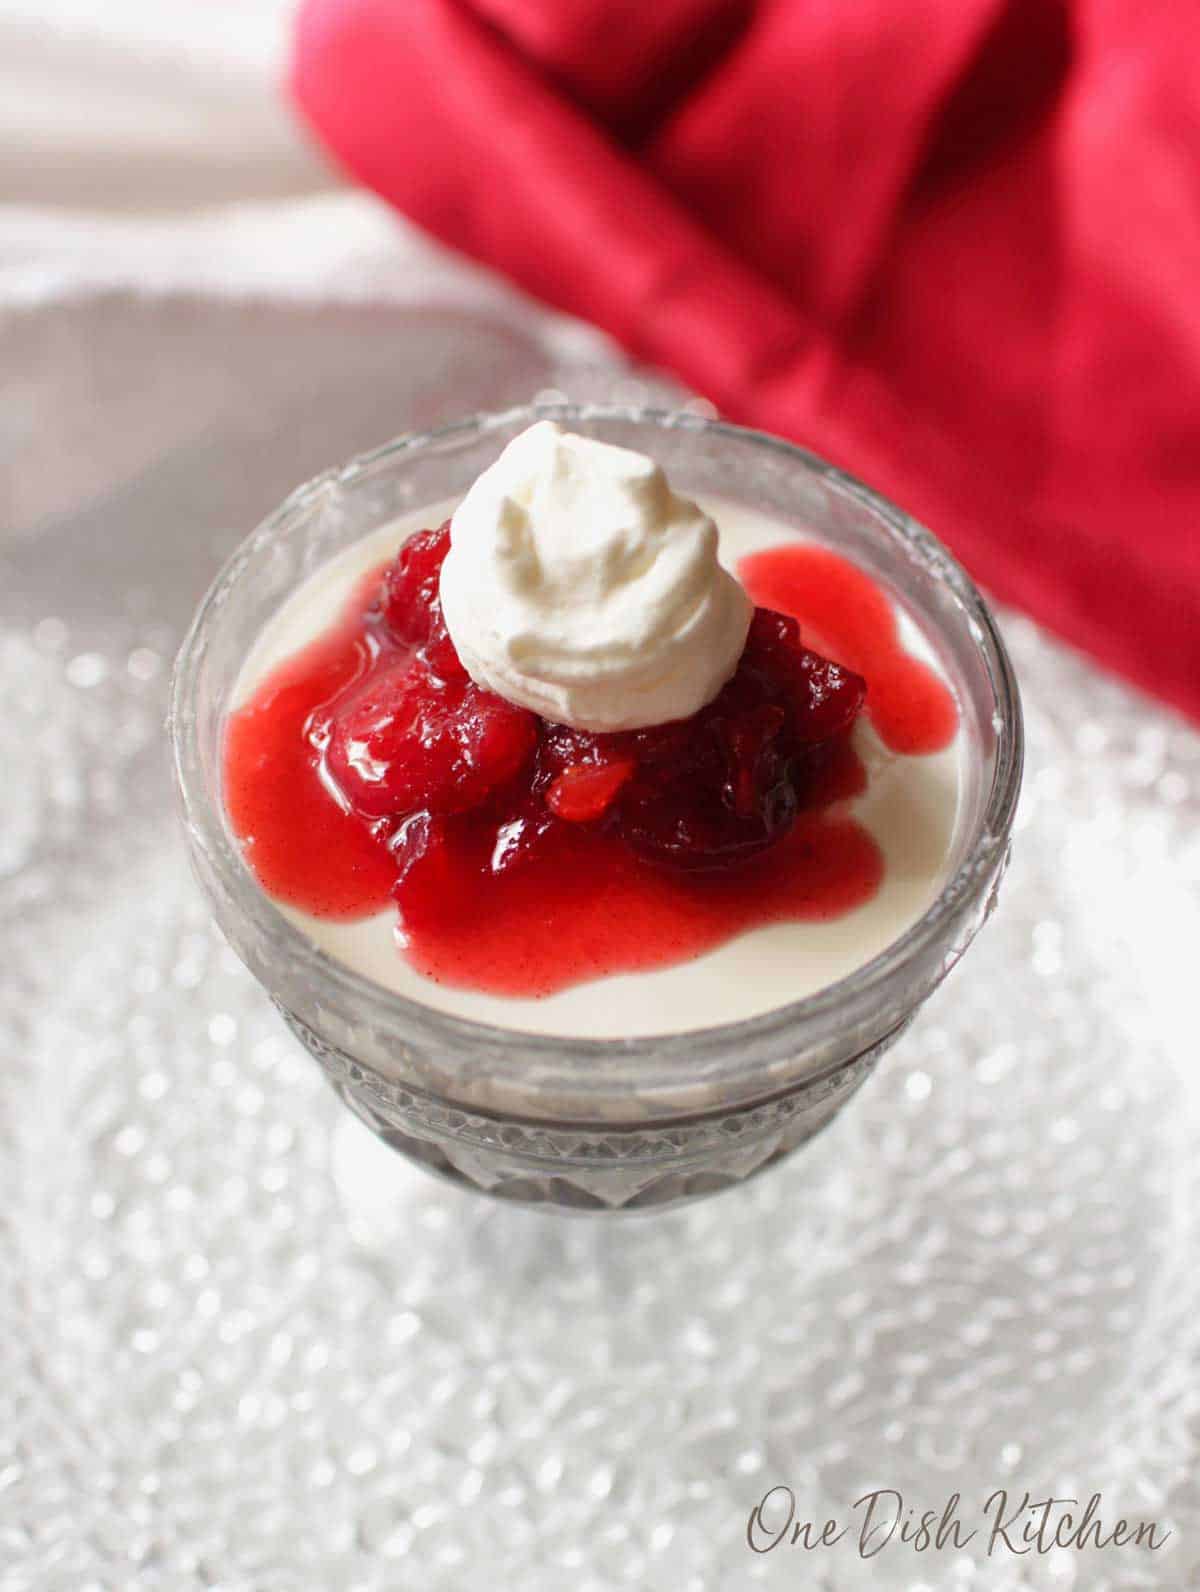 An overhead view of panna cotta topped with cranberry jam and whipped cream in a dessert glass